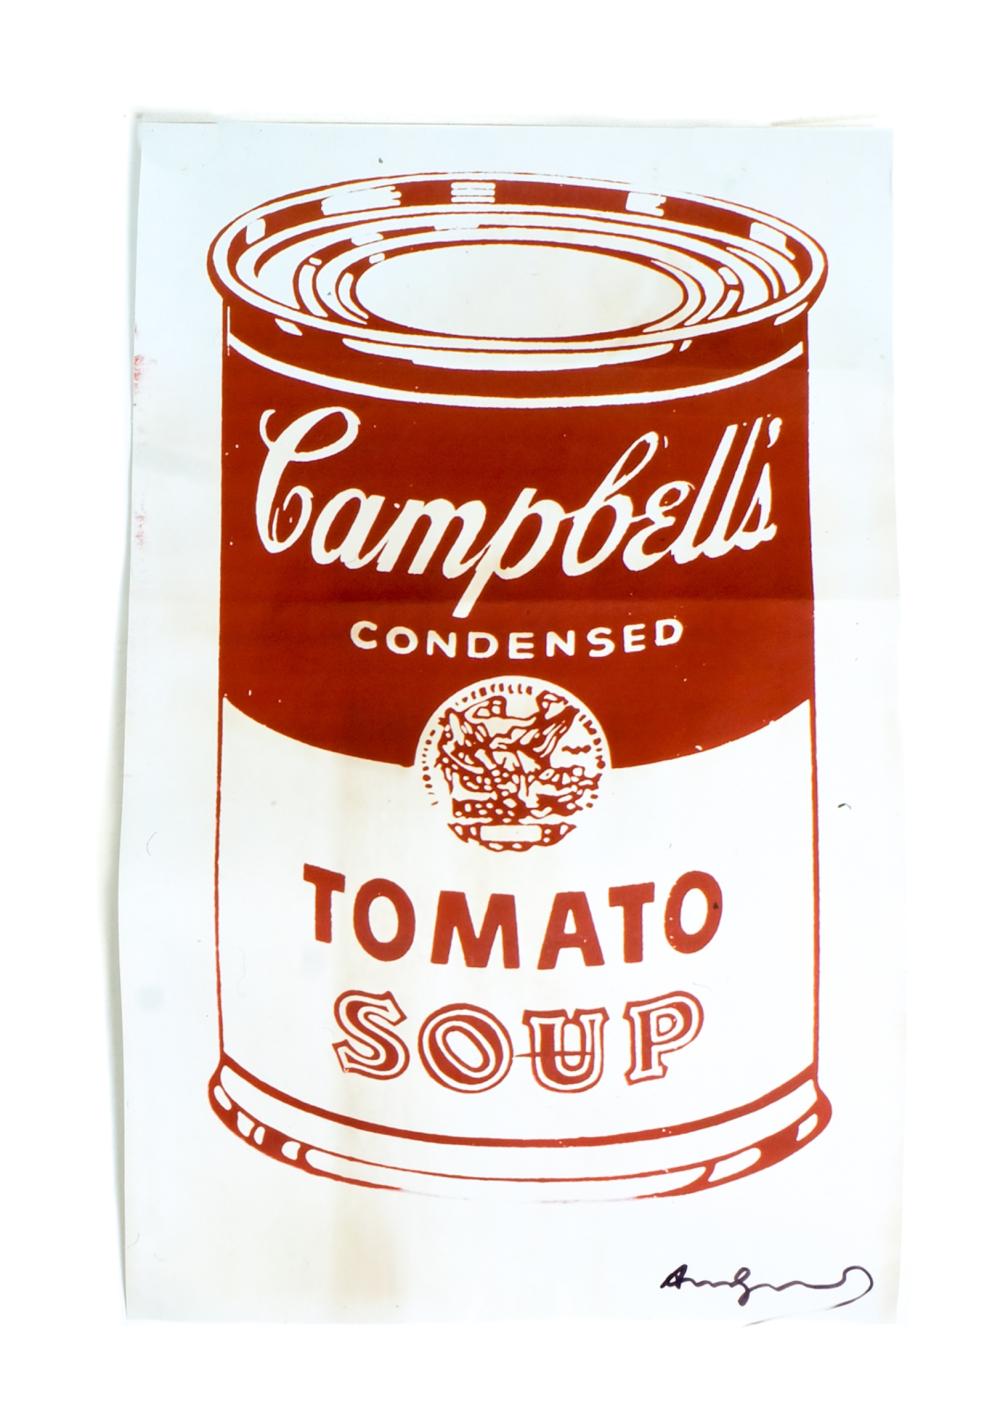 ANDY WARHOL CAMBELL'S TOMATO SOUP,